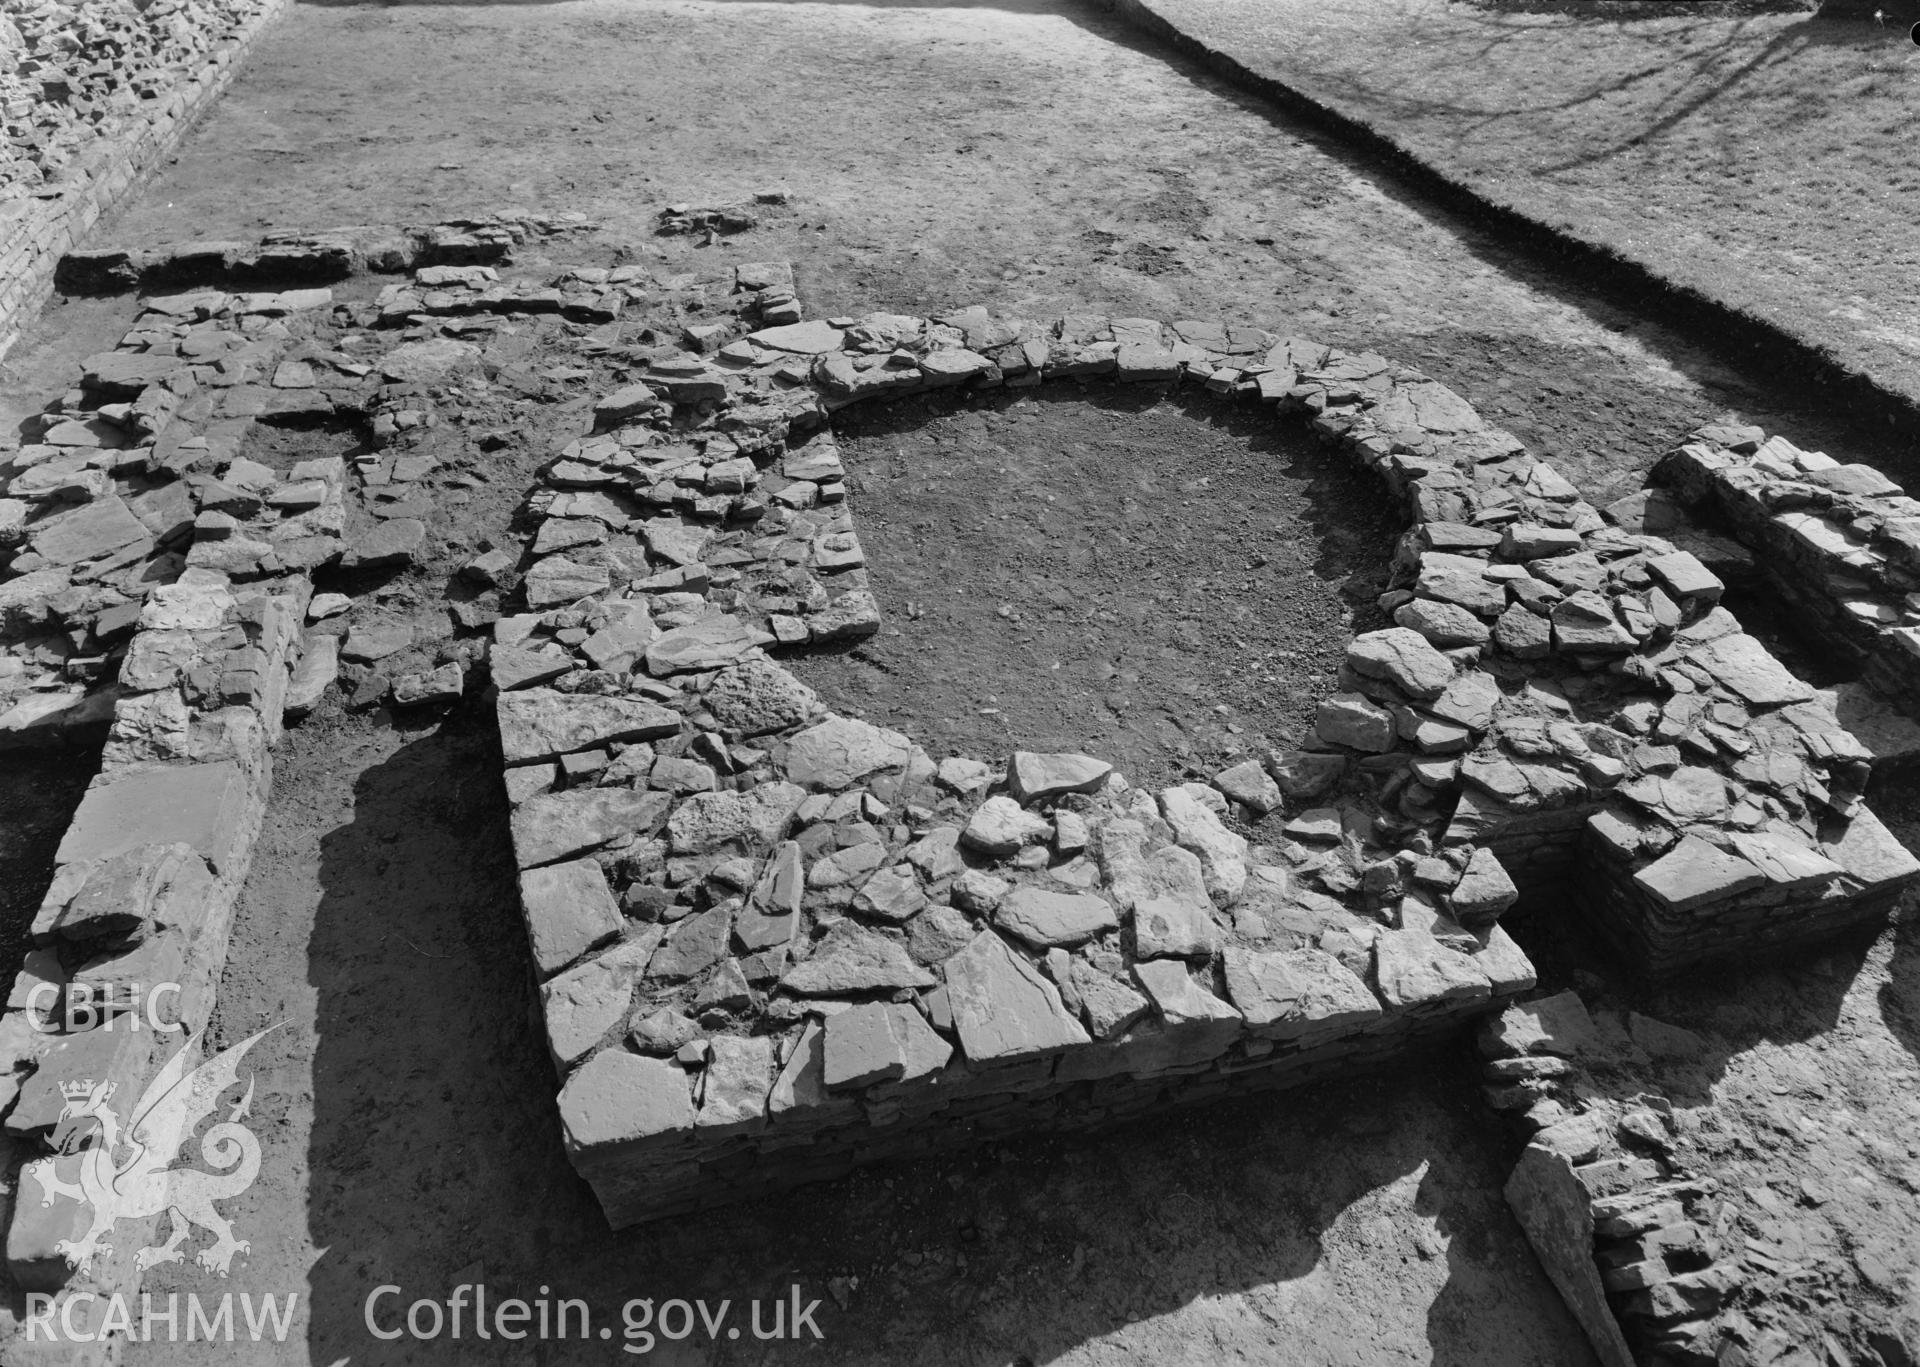 D.O.E photograph of Skenfrith Castle. 1965-66 excavations - foundations of one oven overlaying another.